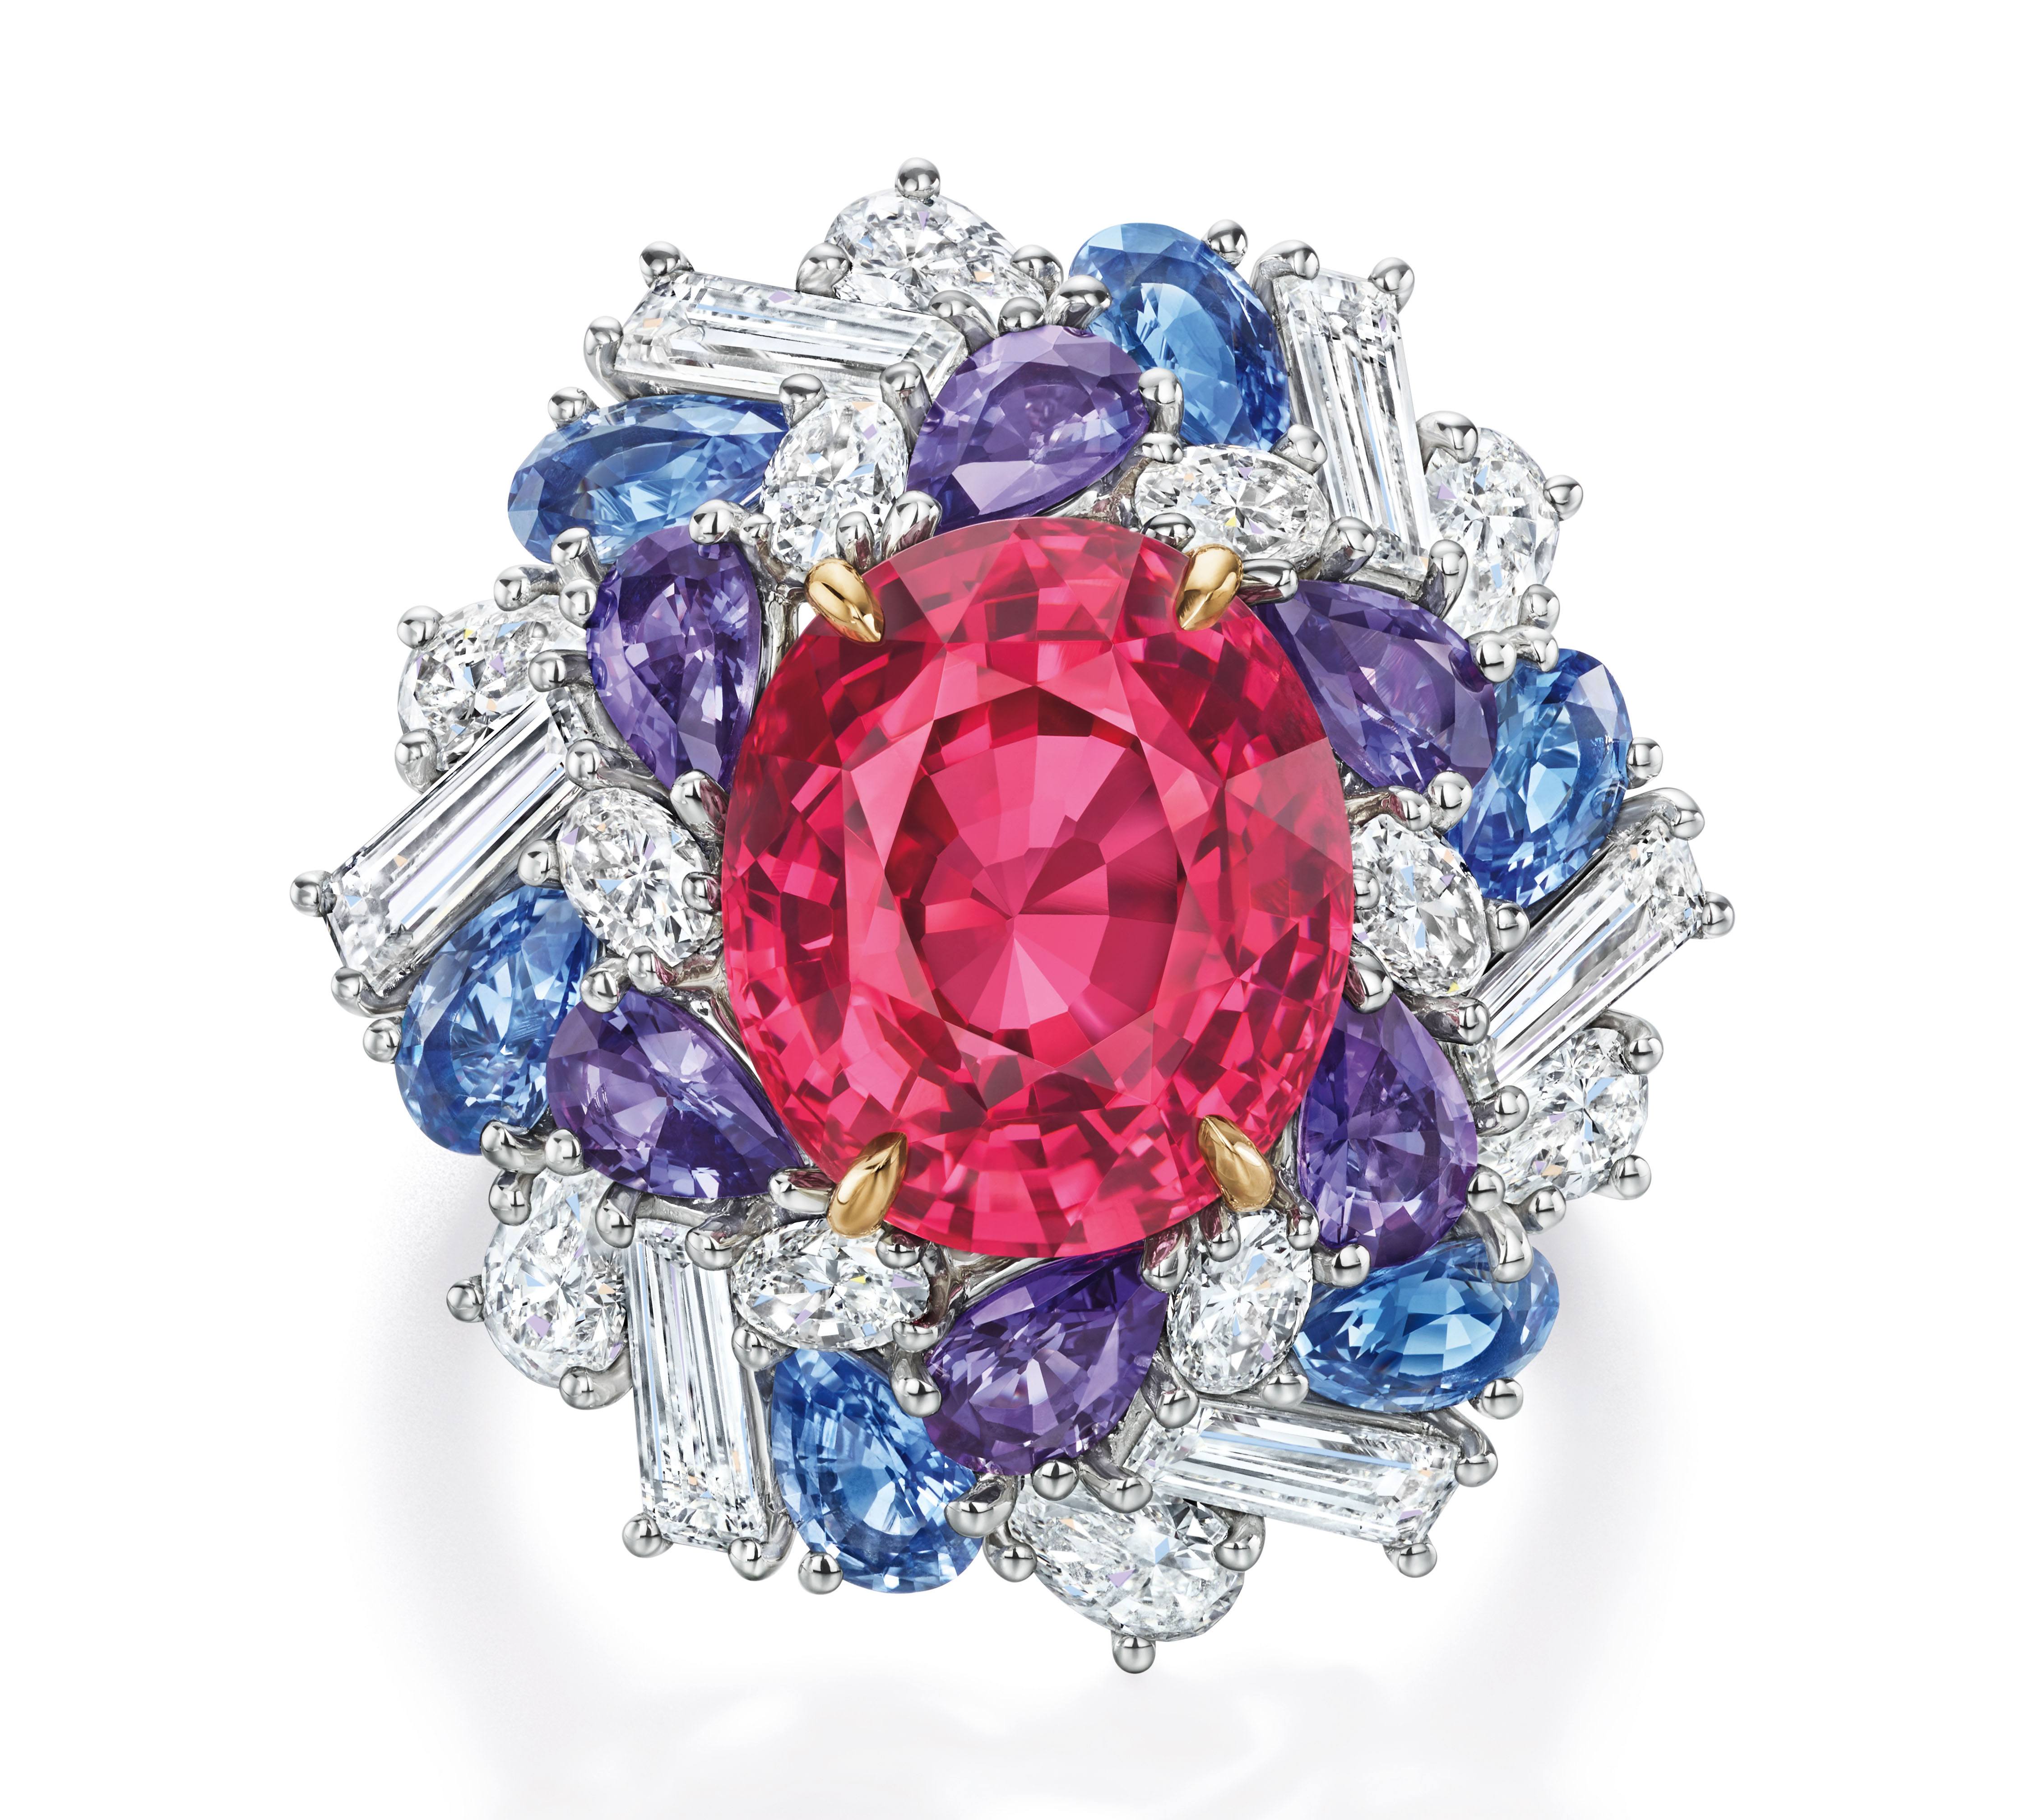 Limited Edition Harry Winston Red Spinel Ring with multi-colored Sapphires and Diamonds from the Candy Collection